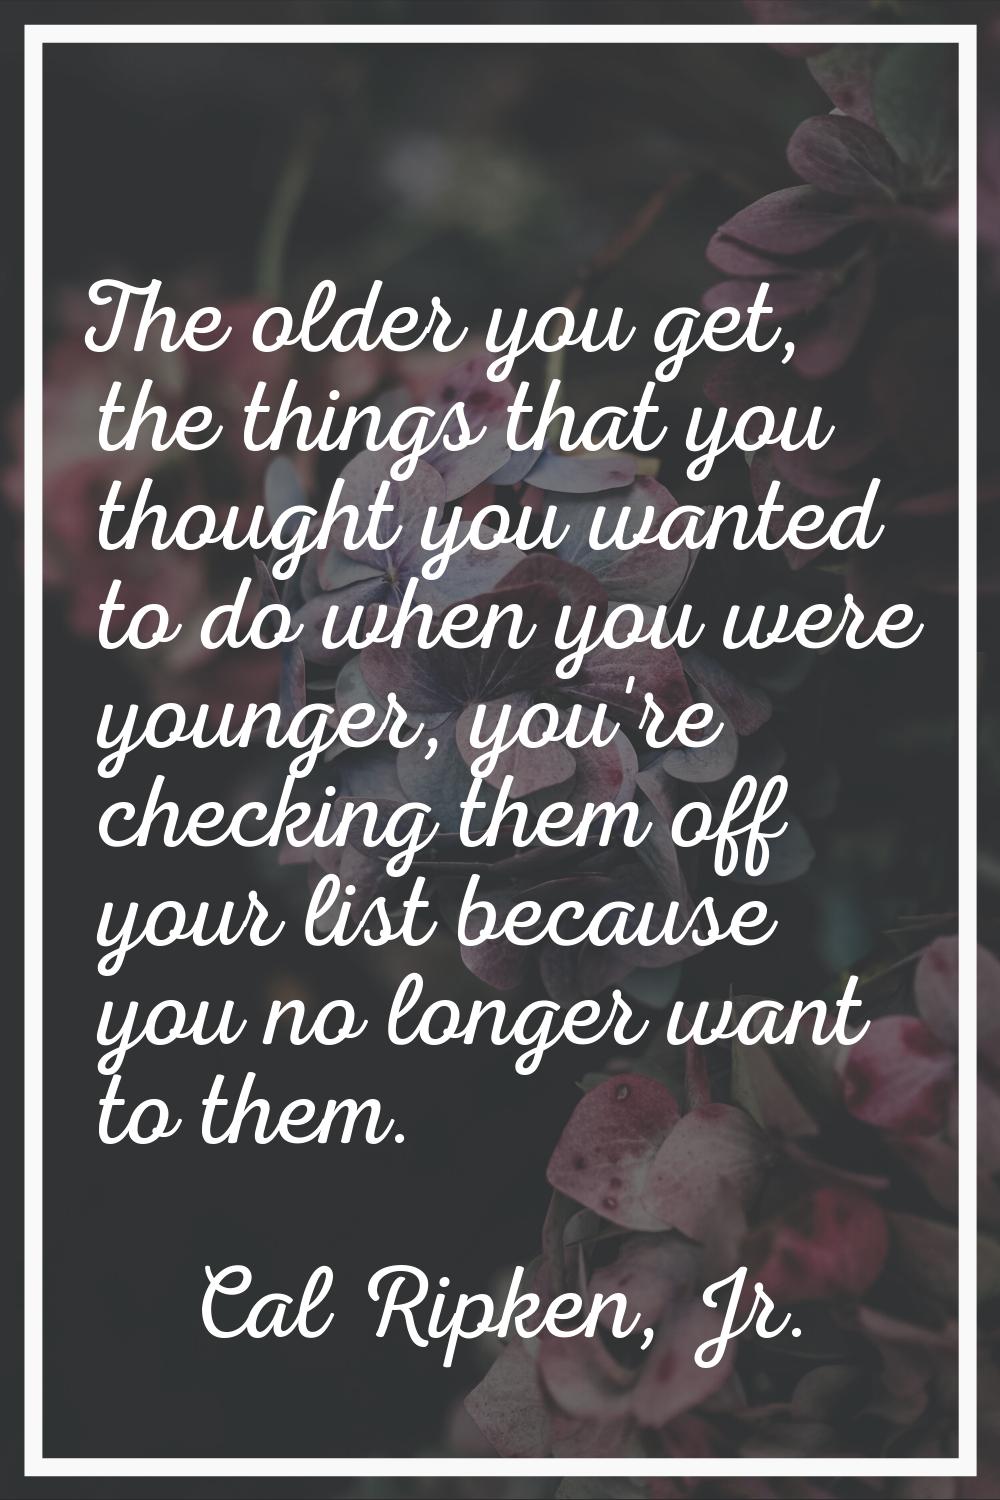 The older you get, the things that you thought you wanted to do when you were younger, you're check